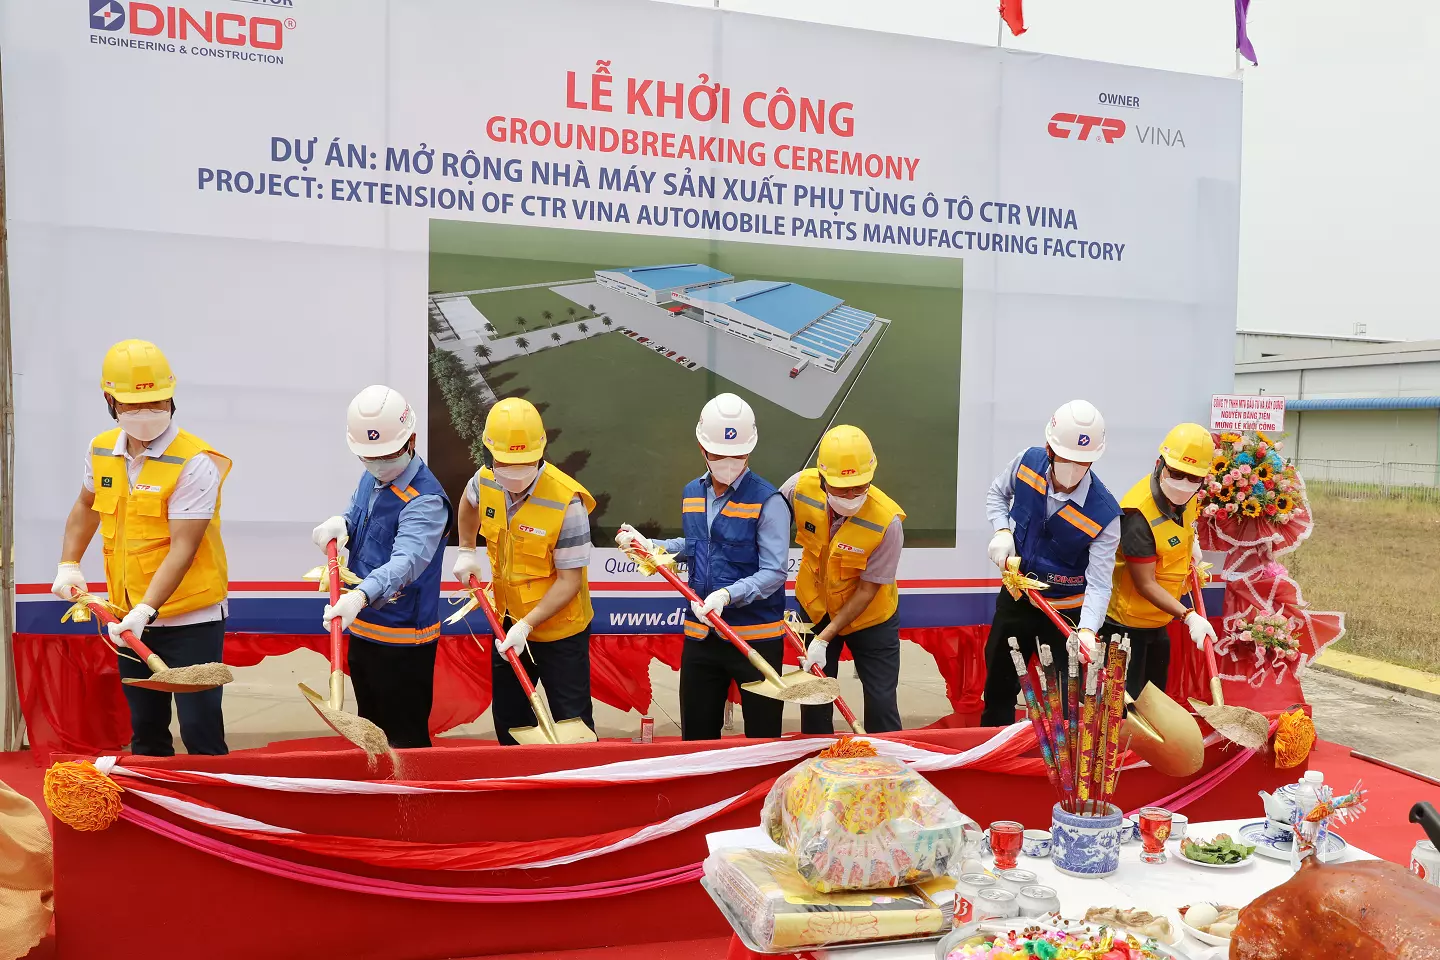 GROUNDBREAKING CEREMONY IMAGES OF CTR VINA AUTOMOBILE PARTS MANUFACTURING FACTORY PROJECT